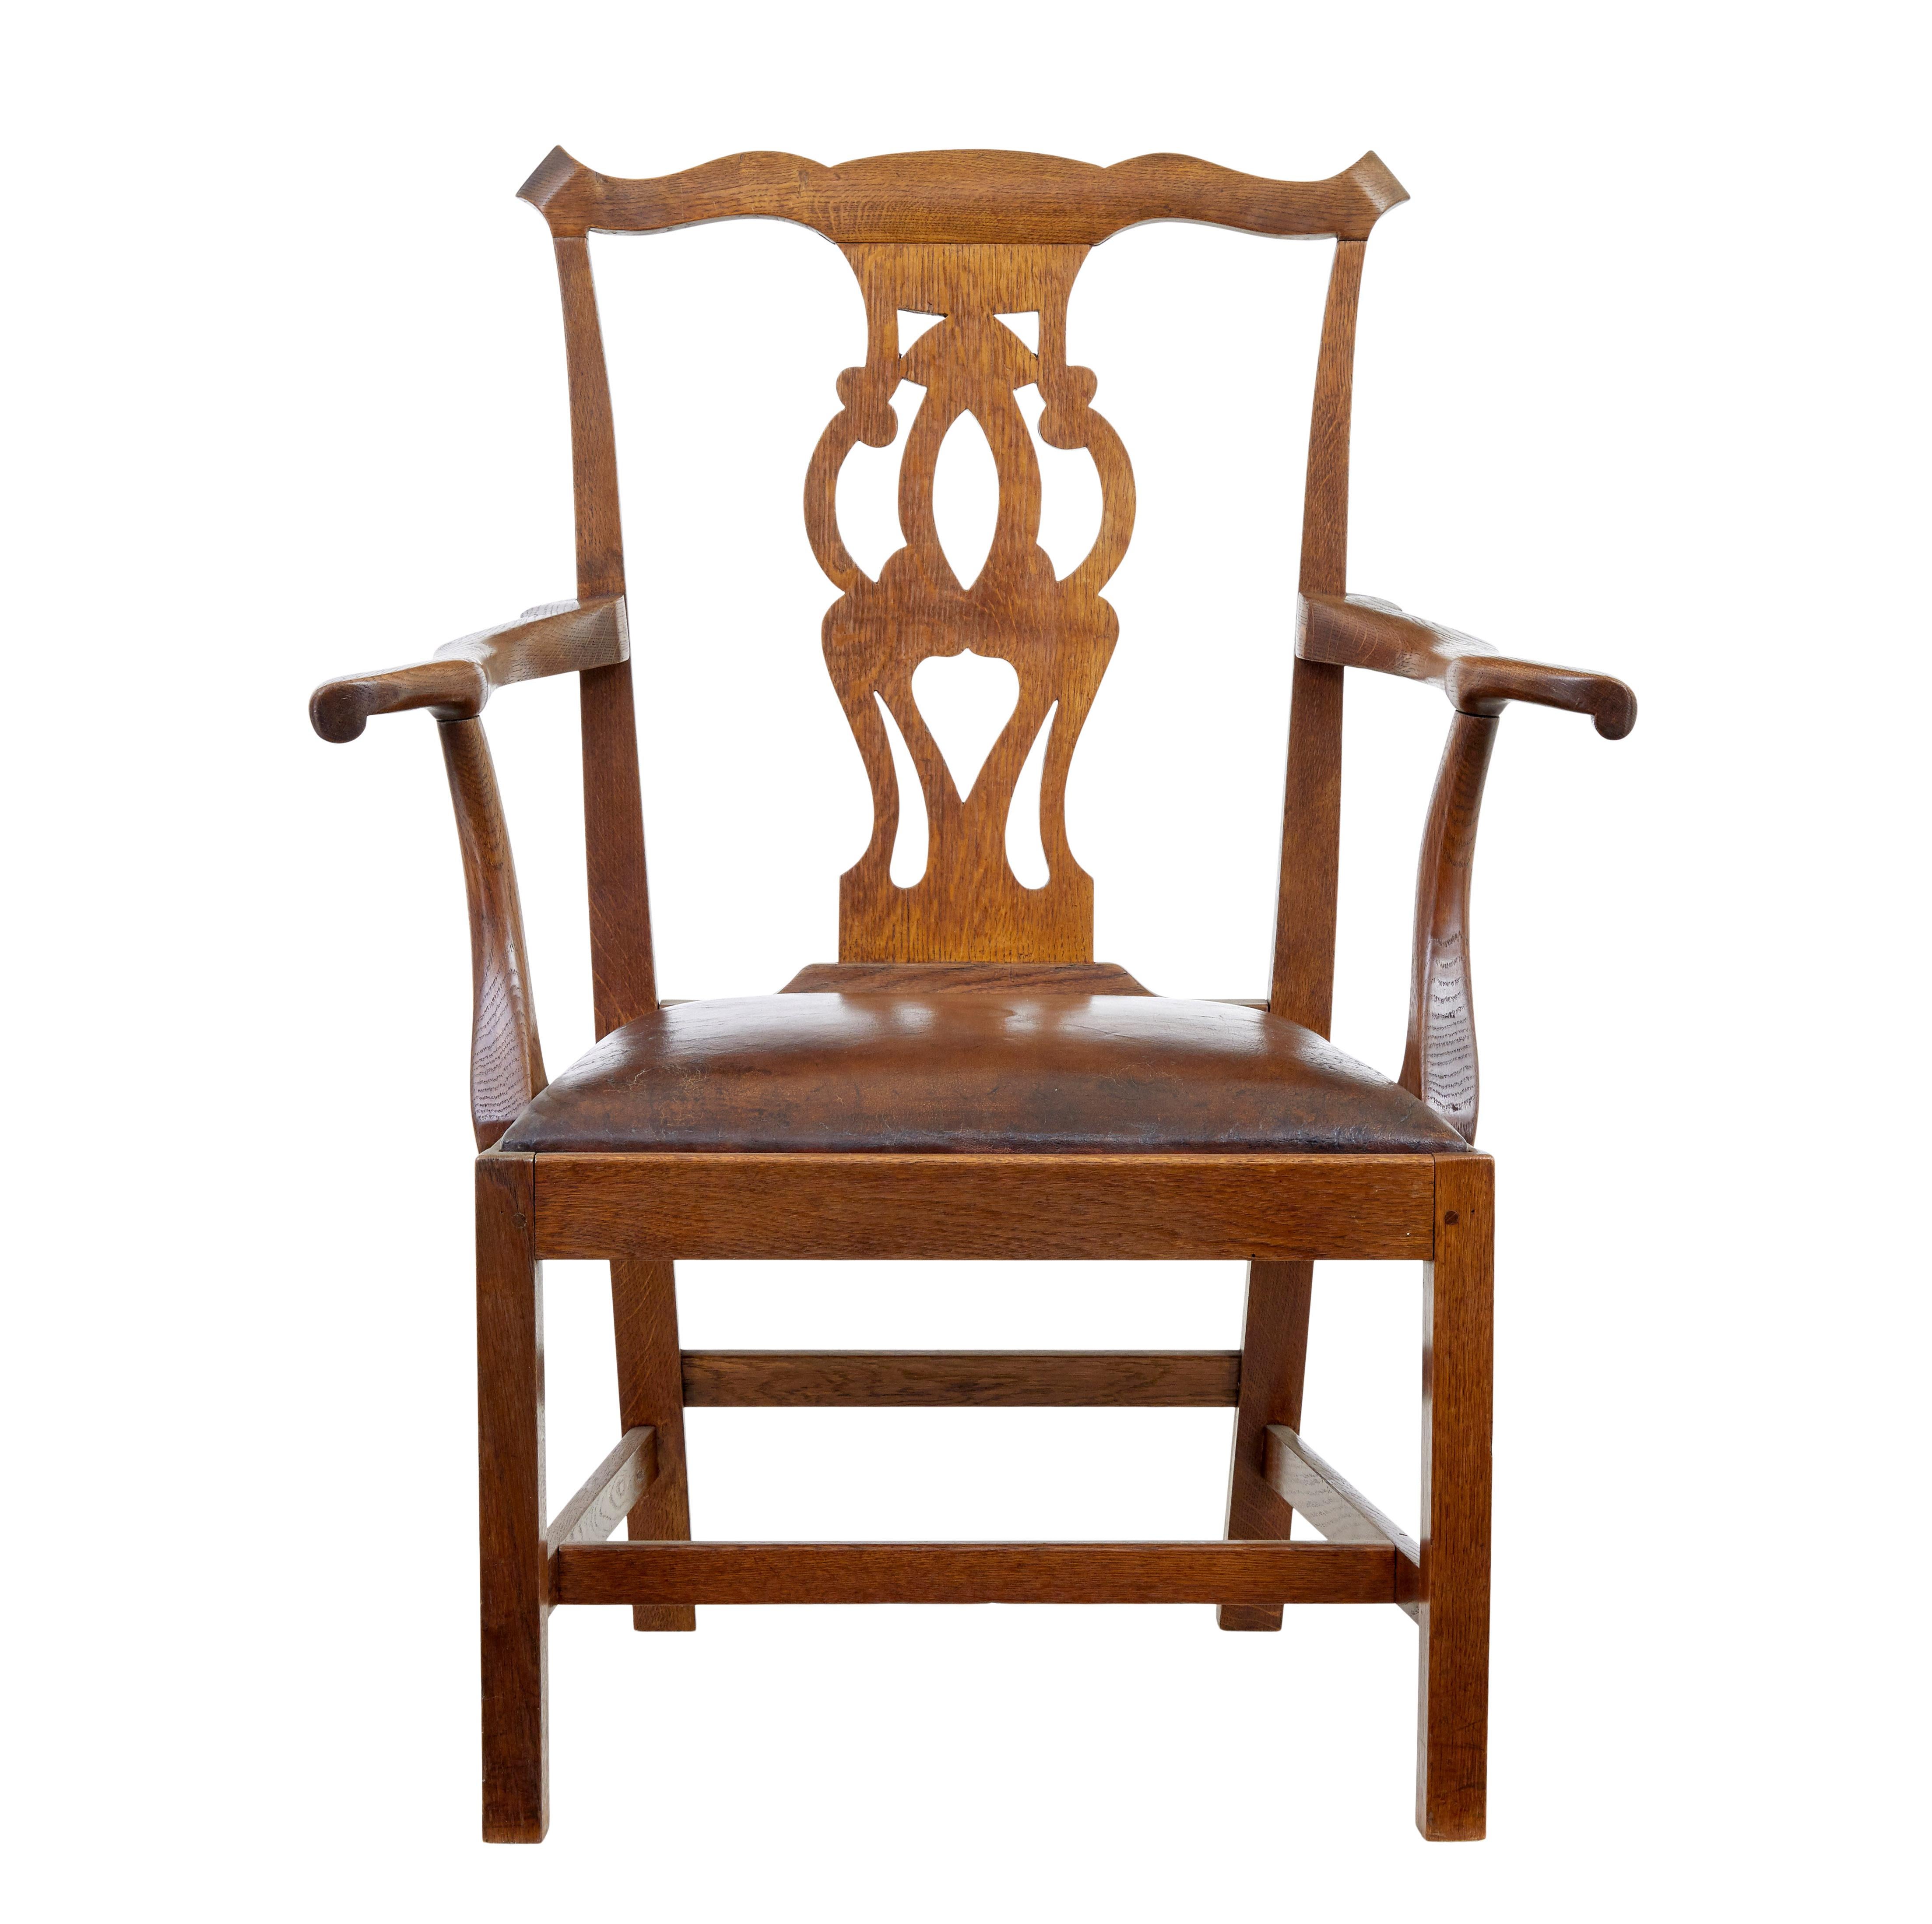 Mid 19th century shepherds crook oak armchair circa 1840, made from solid oak.

Fantastic chair with the proportions that lends itself well to making it a desk chair.

Shaped back with fret work back rest.  Real deep shepherds crook shaped arms,